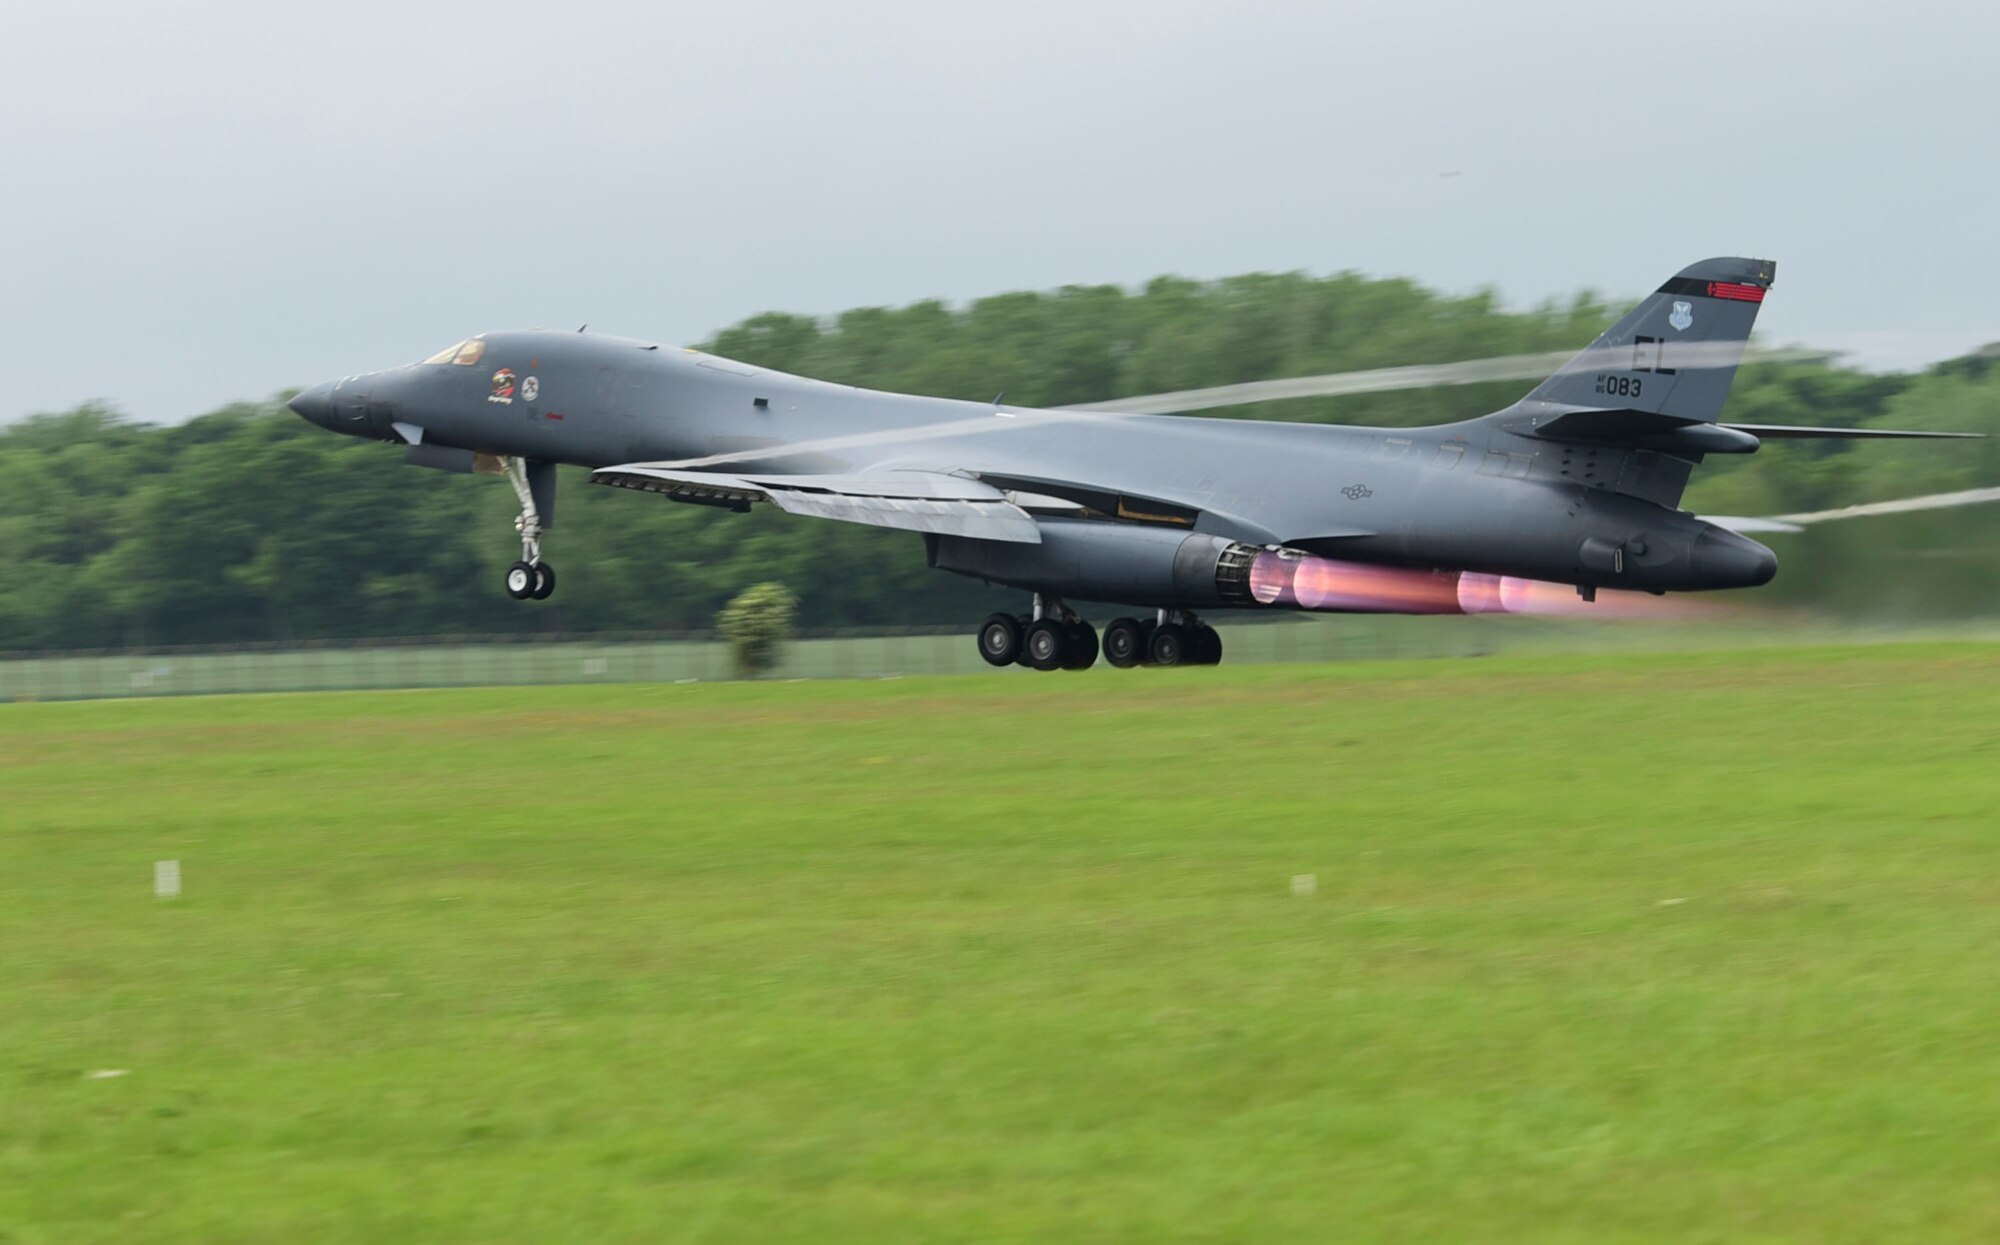 A B-1B Lancer assigned to Ellsworth Air Force Base, S.D., departs the runway at Royal Air Force Fairford, U.K., June 8, 2017. The bomber is forward deployed in support of exercises BALTOPS and Saber Strike to conduct bomber and assurance missions. (U.S. Air Force photo by Tech. Sgt. Miguel Lara III)